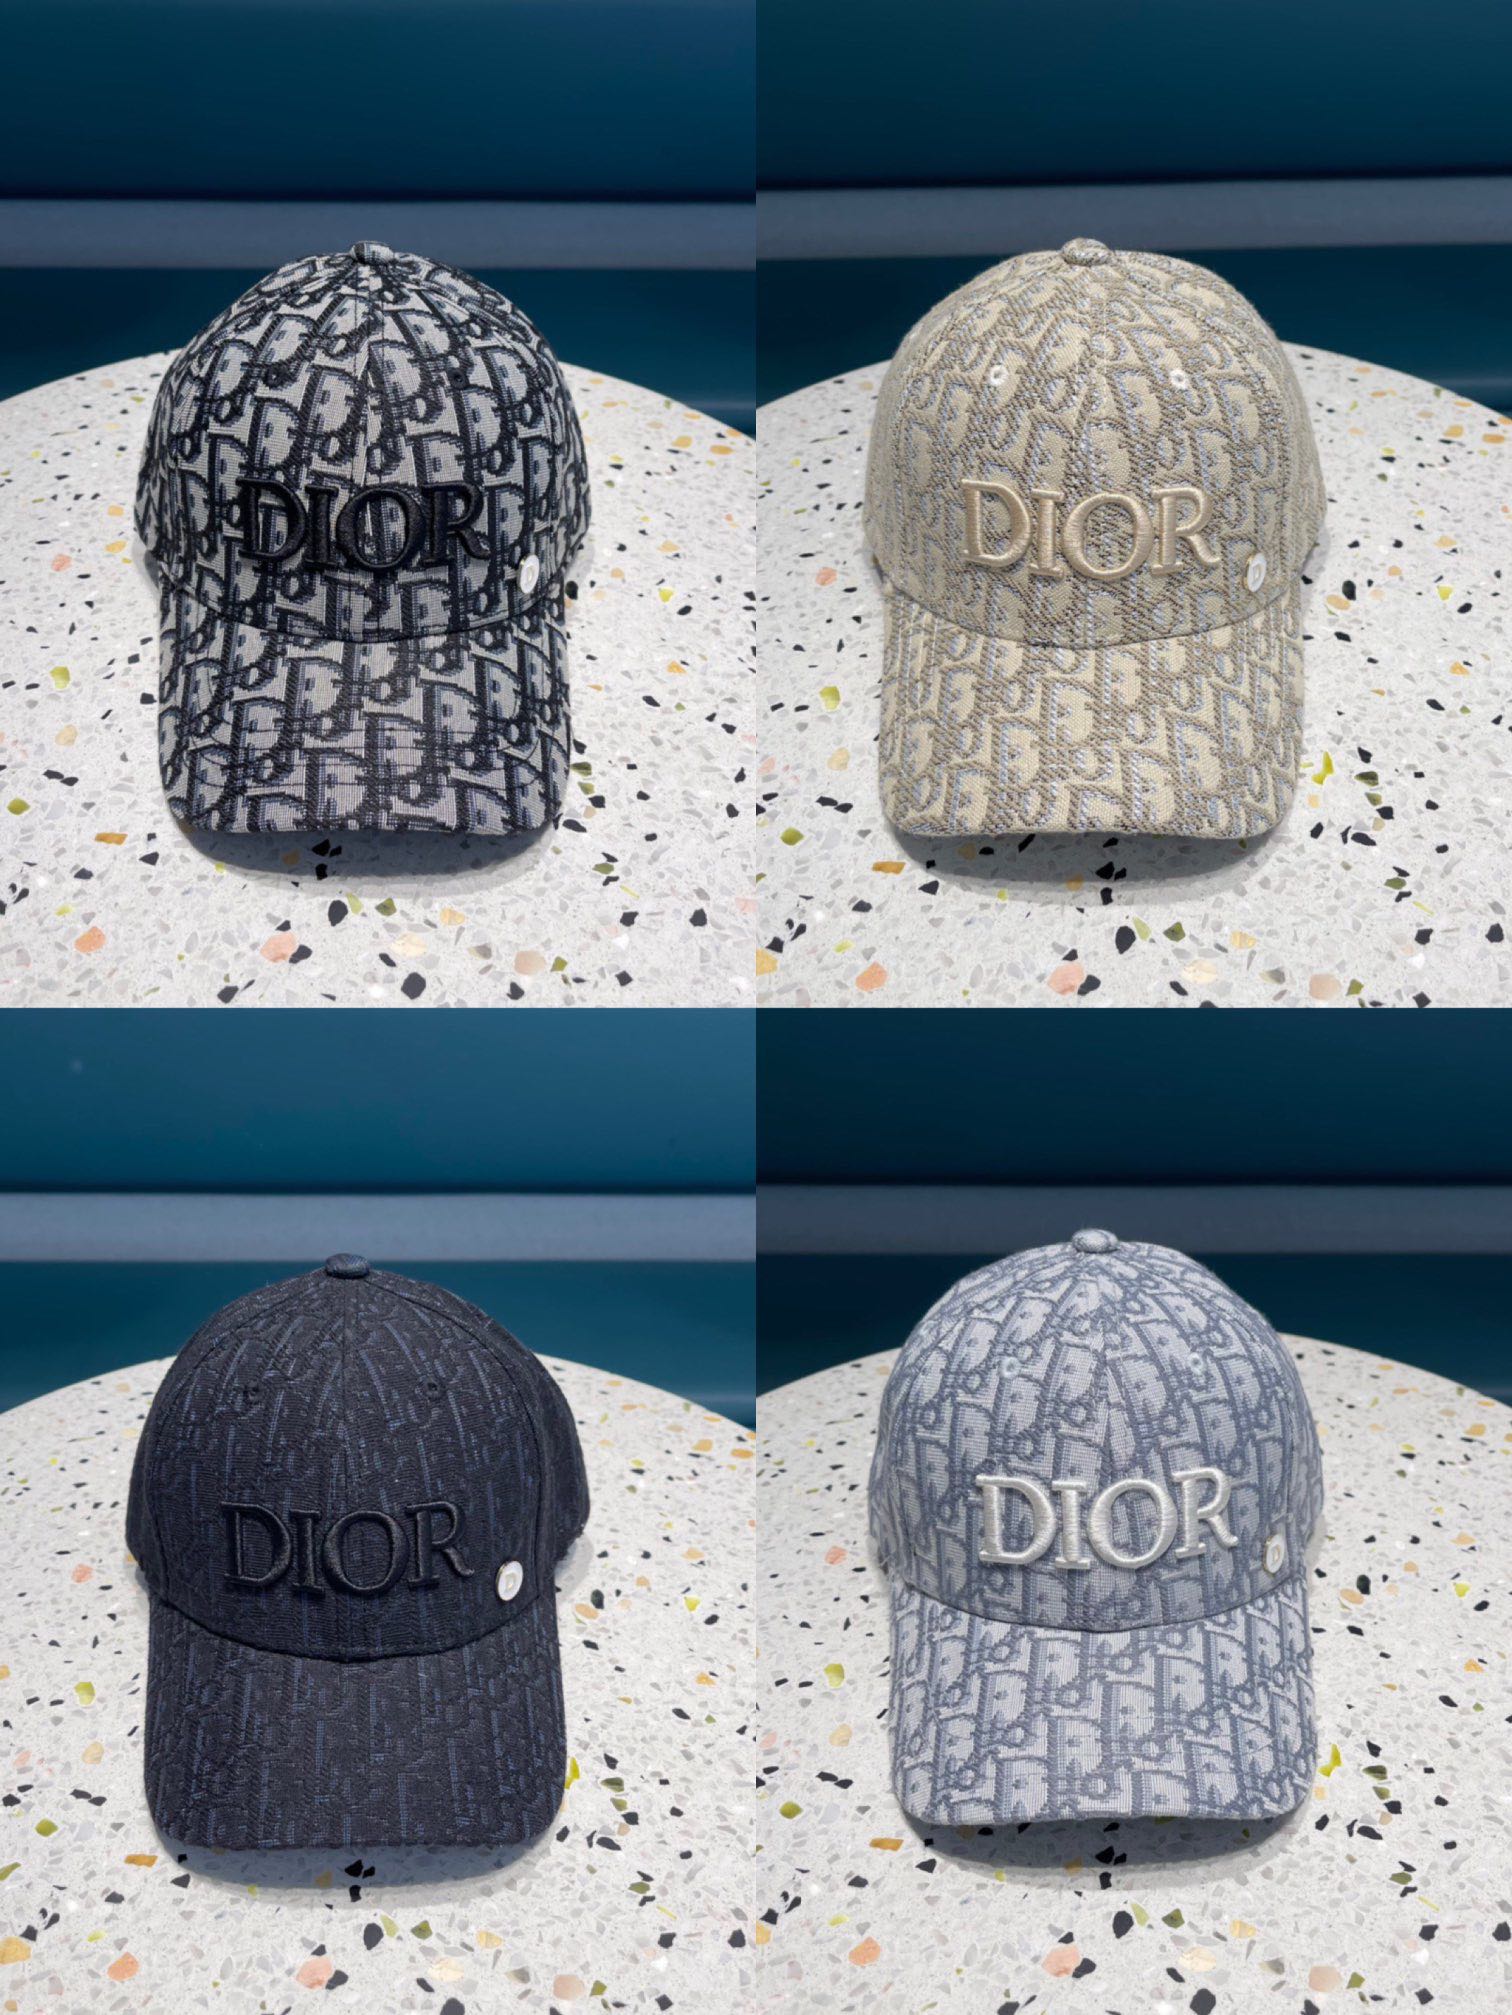 Dior Hats Baseball Cap Pink Embroidery Unisex Cotton Spring/Summer Collection Fashion